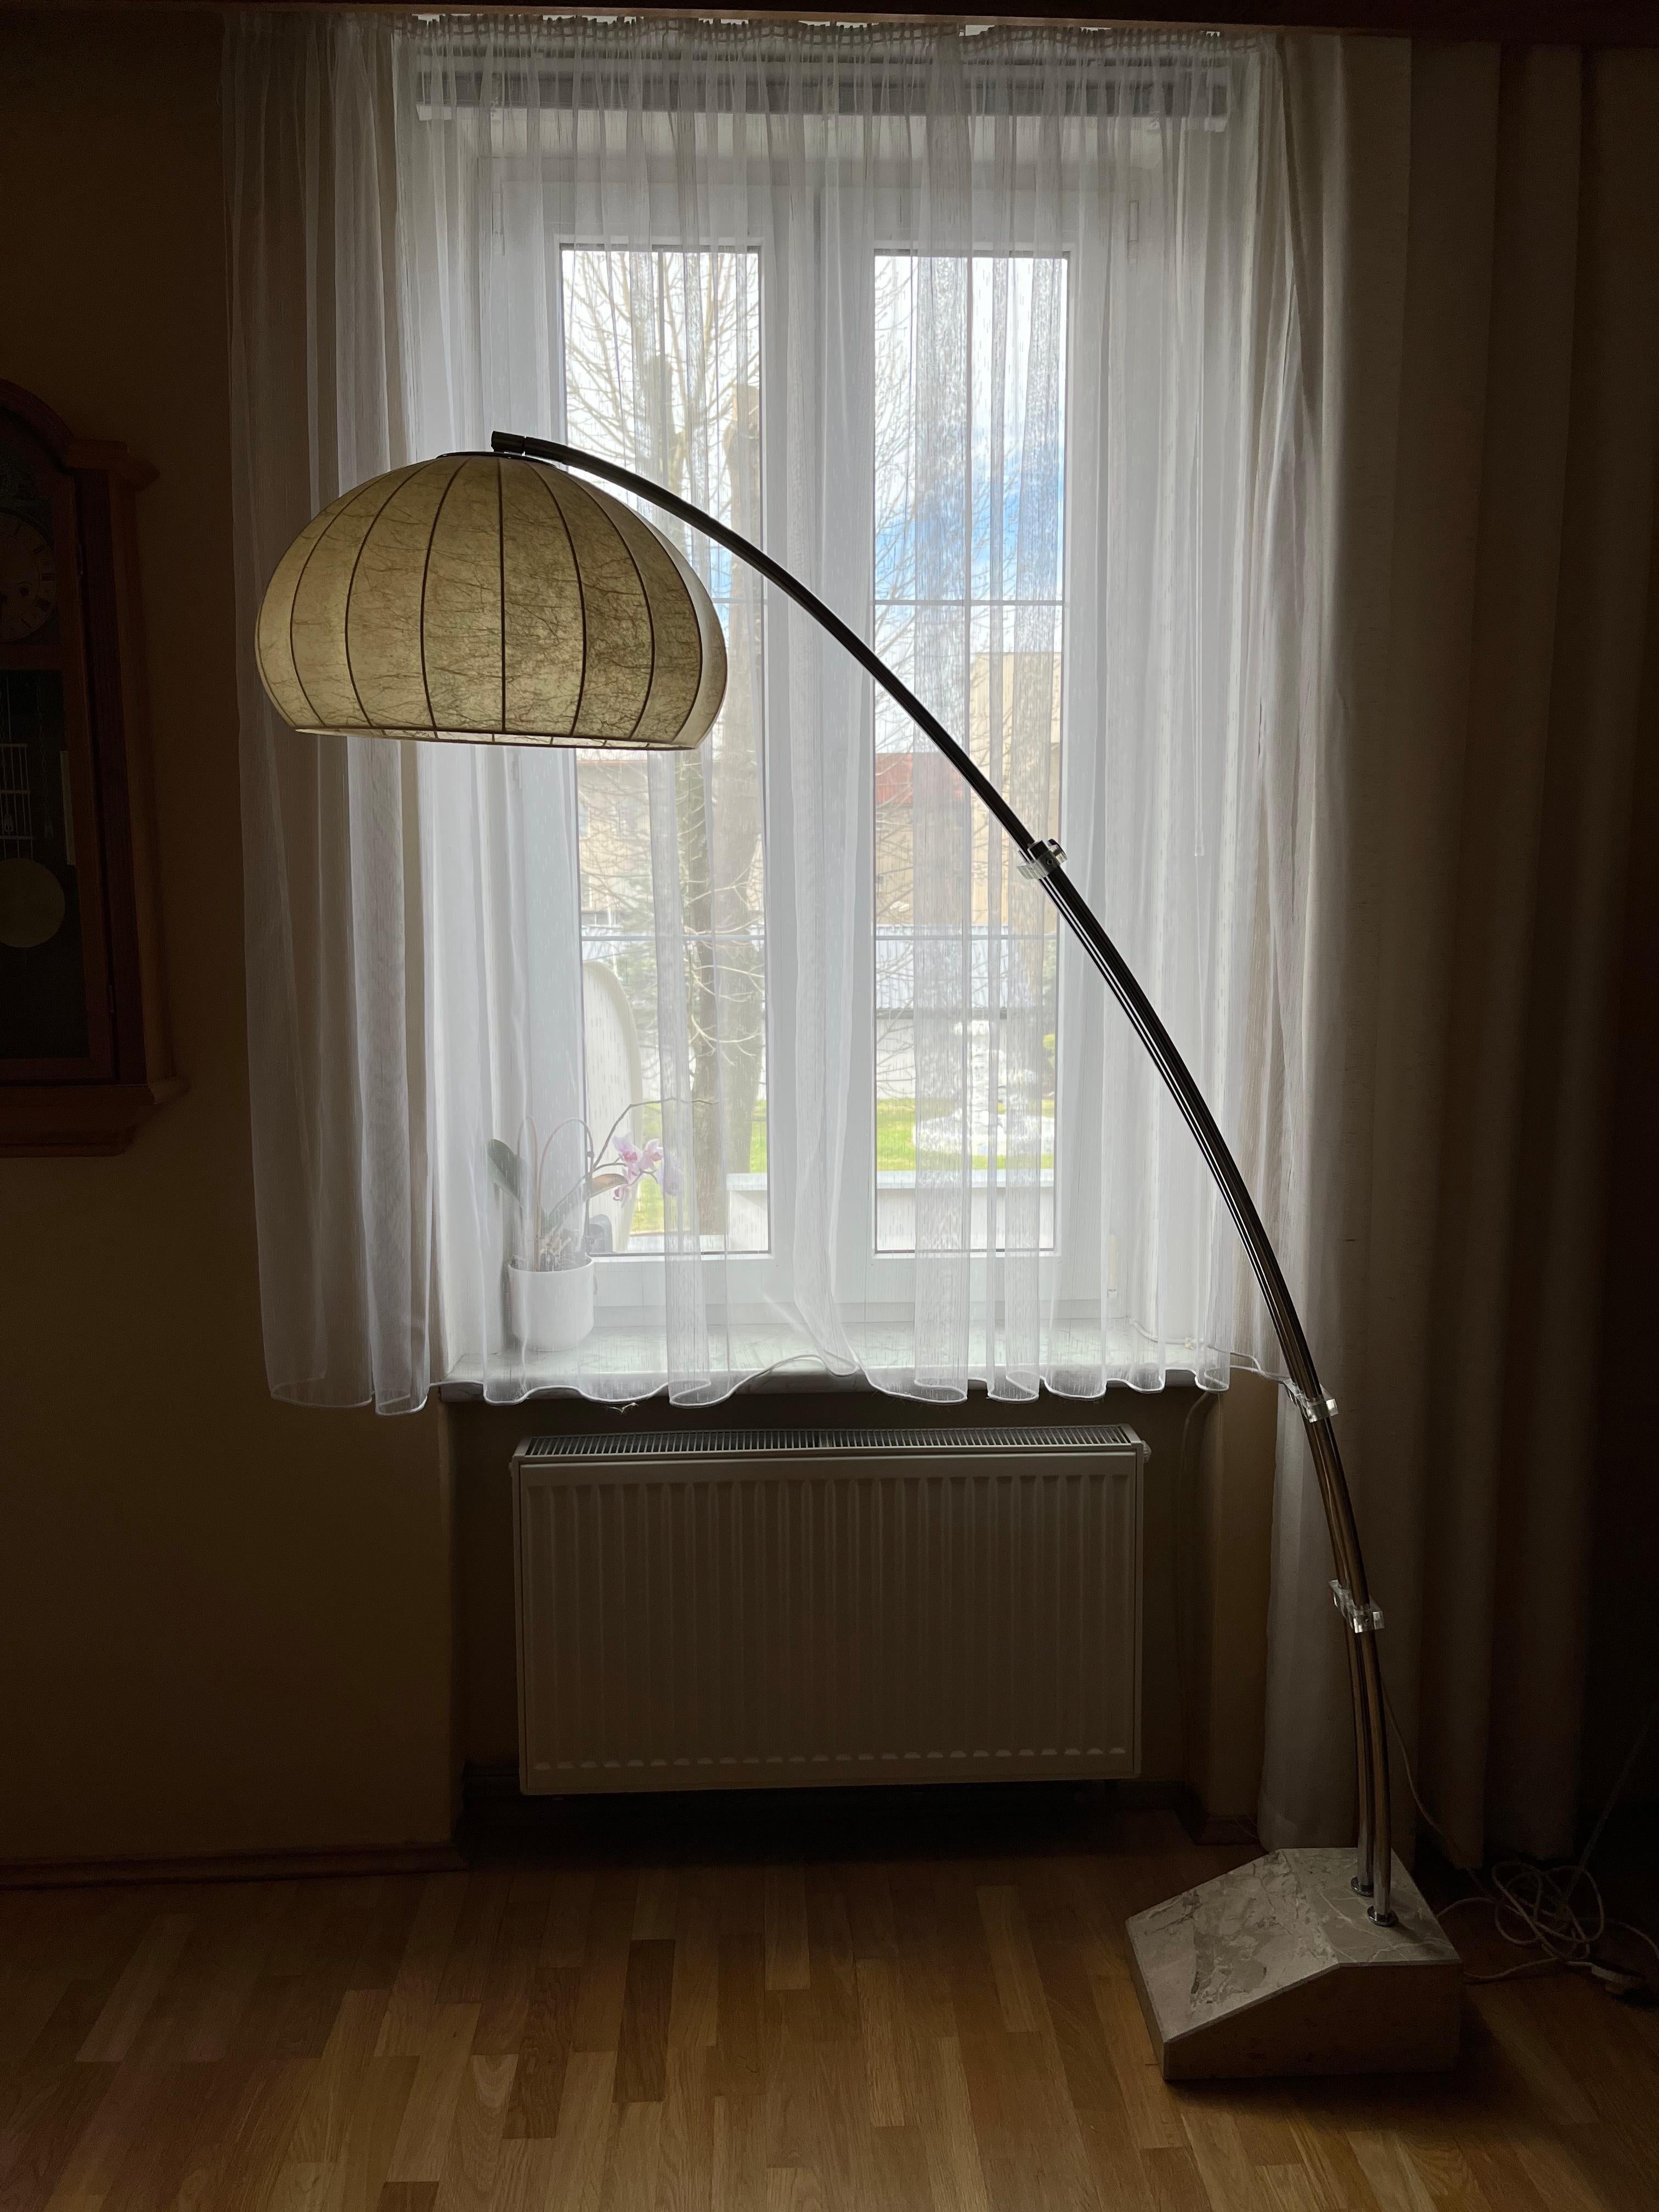 Late 20th Century Design Cocoon Extendable Arc Floor Lamp from Hustadt Leuchten, Germany, 1970s For Sale